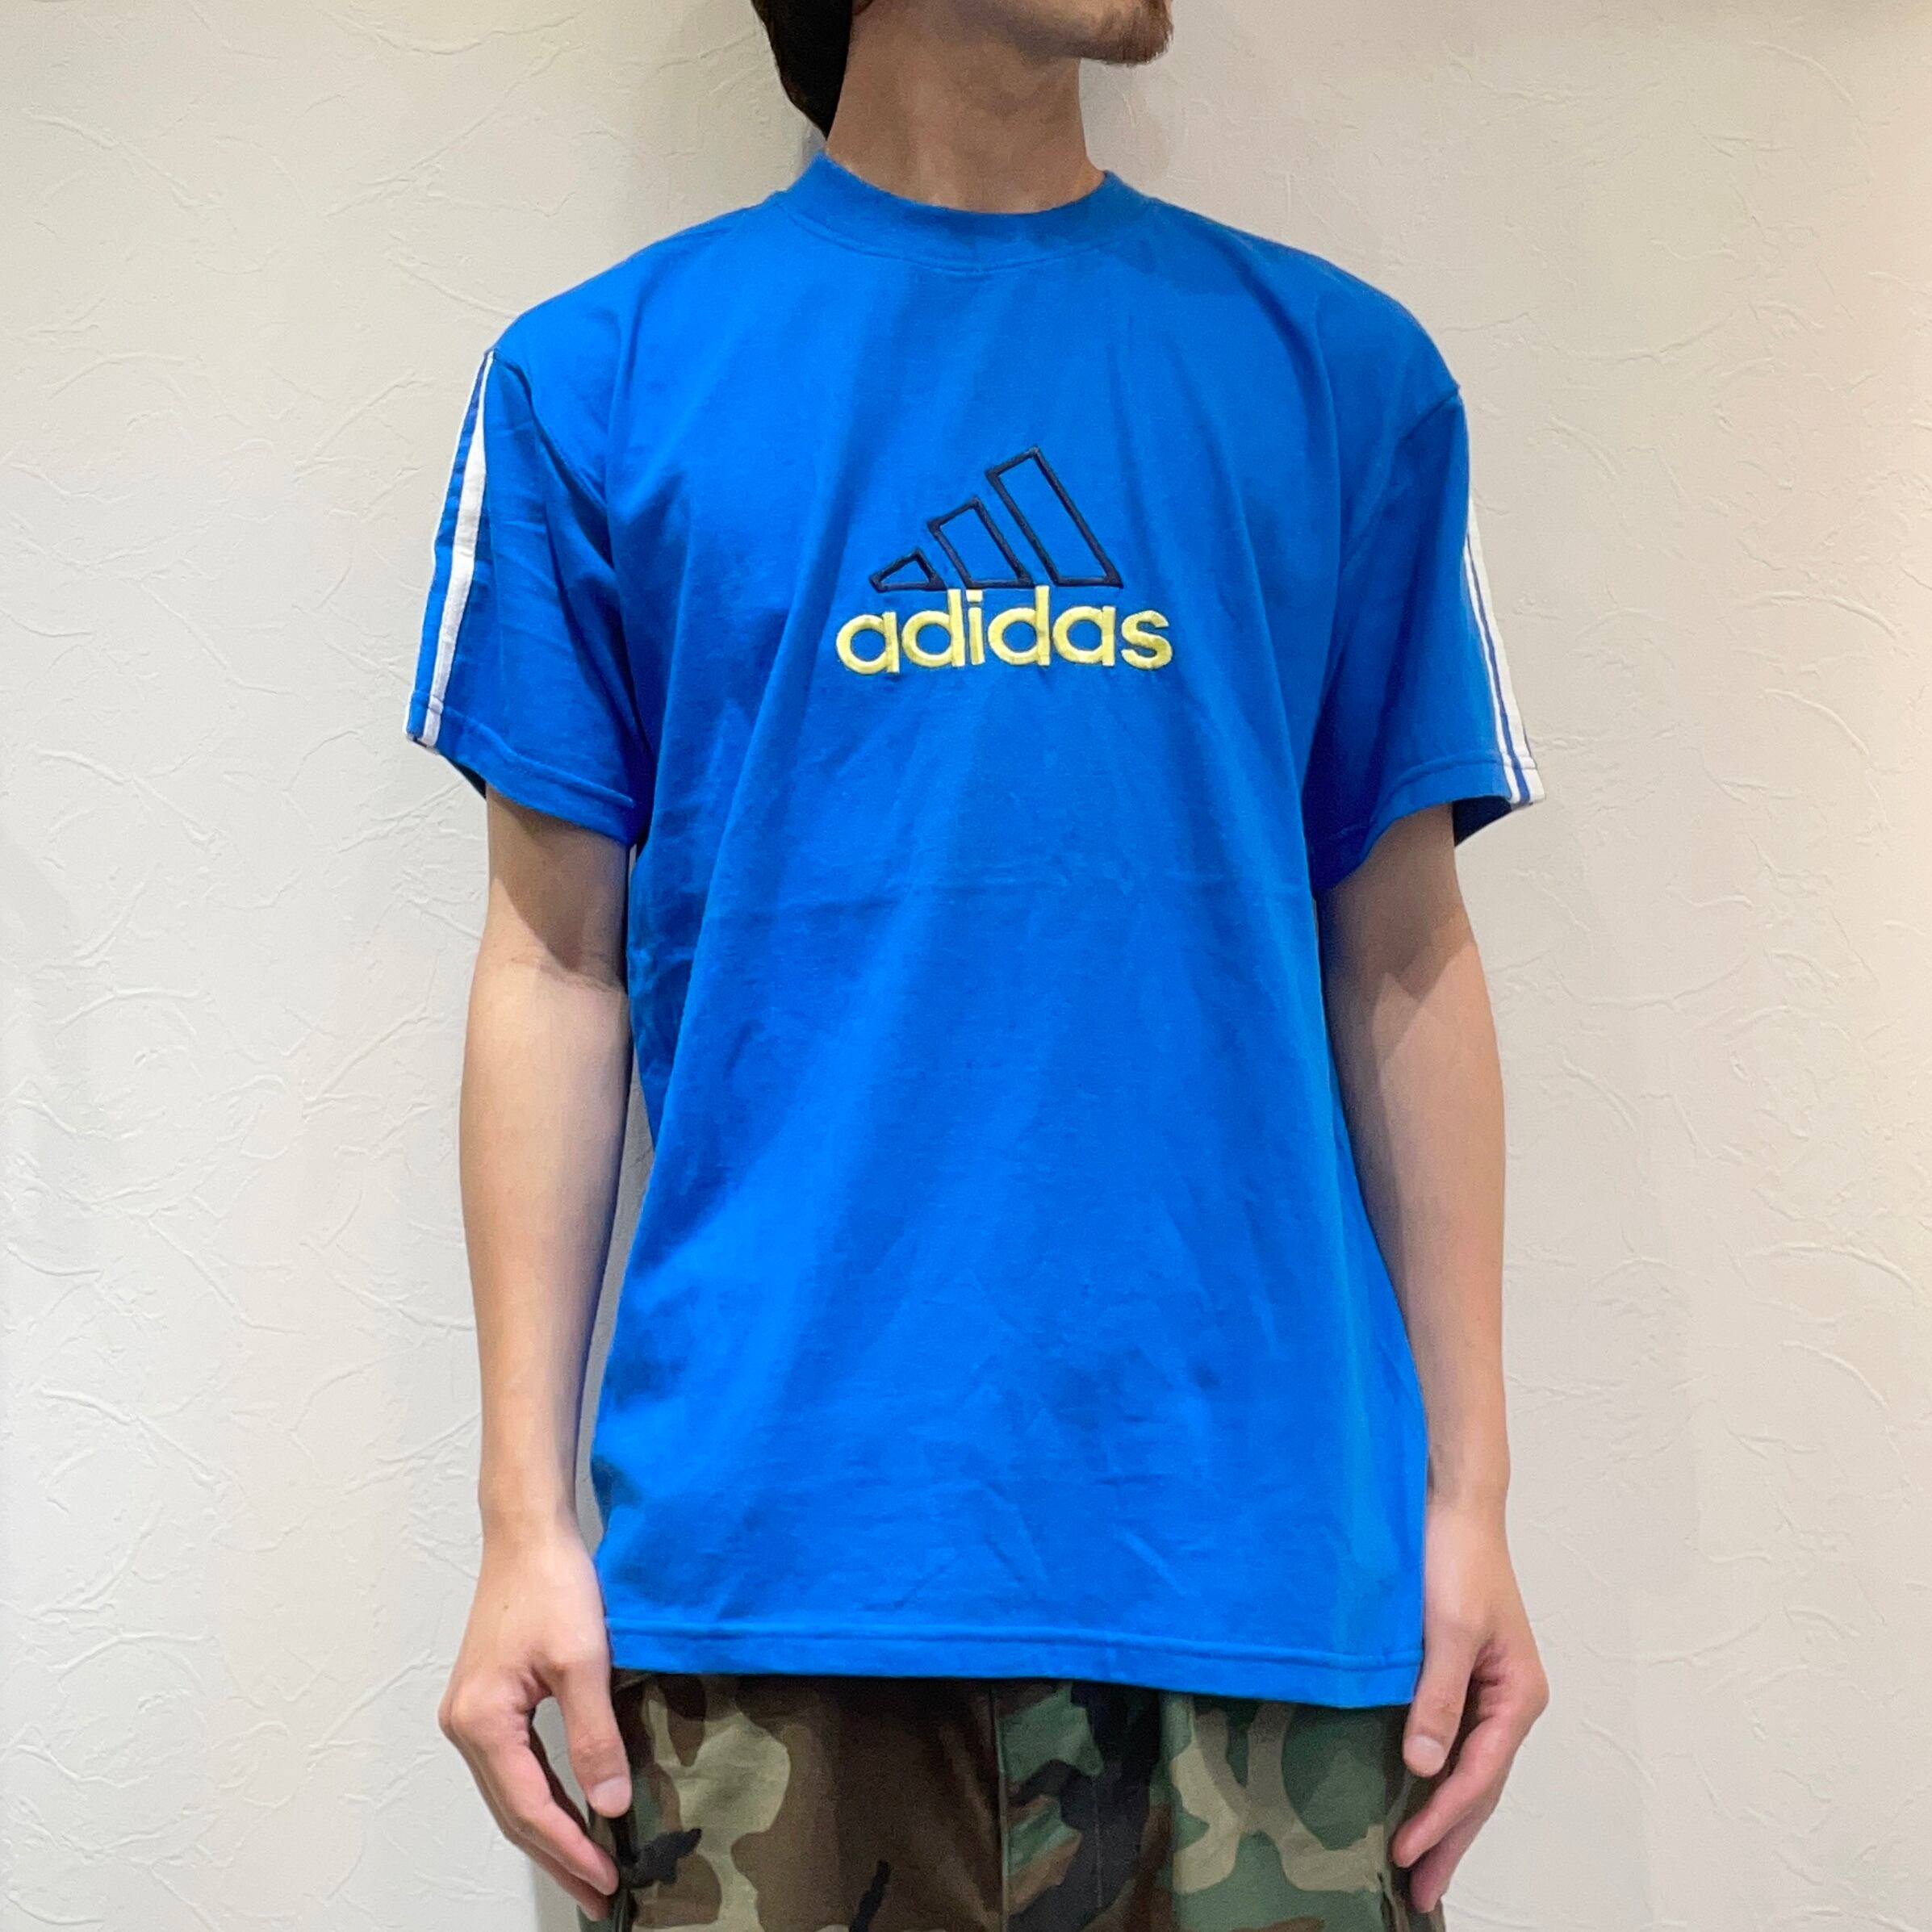 DEADSTOCK】90's "ADIDAS" THREE STRIPES LOGO Tee | HEIGHTS Online Store